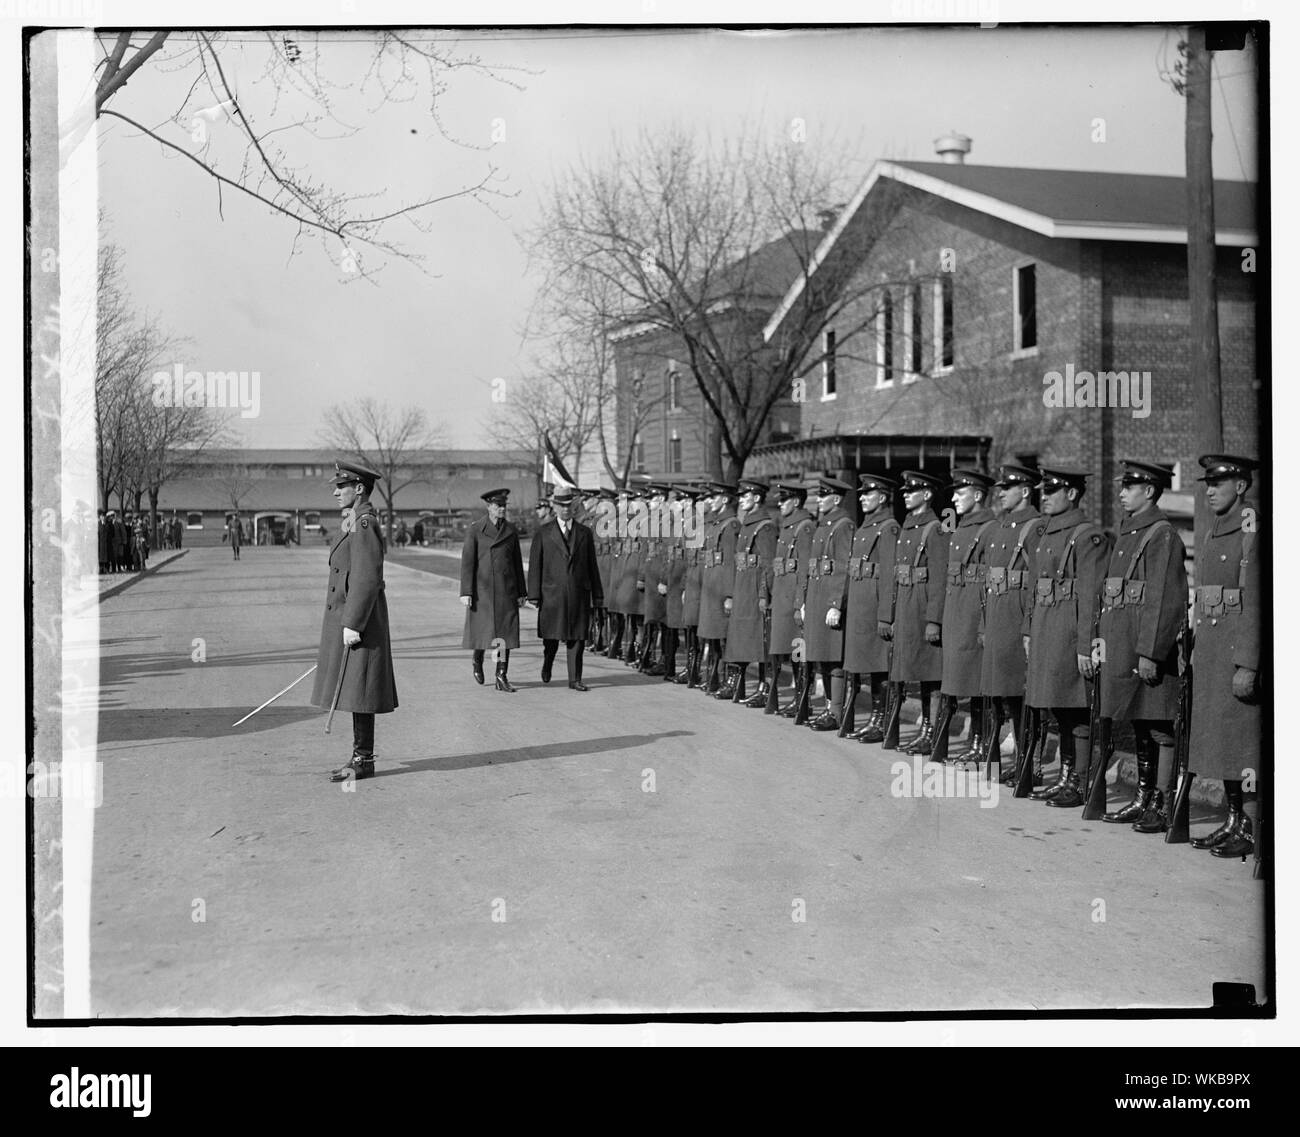 Jas. W. buona a Fort Myer, 3/8/29 Foto Stock